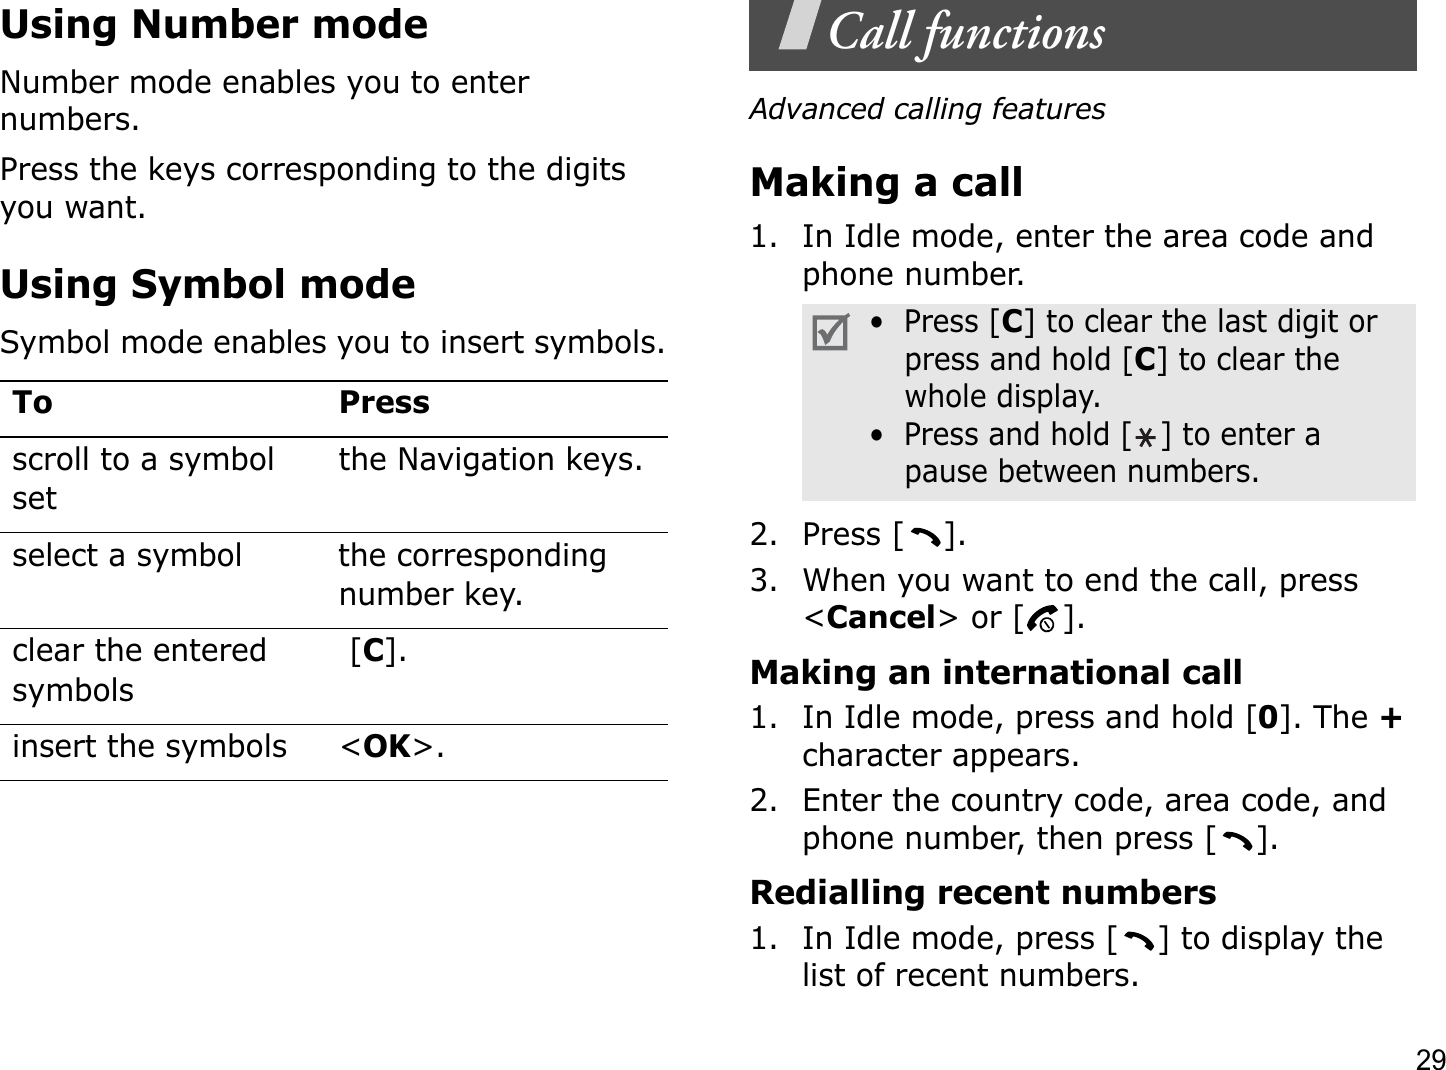 29Using Number modeNumber mode enables you to enter numbers. Press the keys corresponding to the digits you want.Using Symbol modeSymbol mode enables you to insert symbols.Call functionsAdvanced calling featuresMaking a call1. In Idle mode, enter the area code and phone number.2. Press [ ].3. When you want to end the call, press &lt;Cancel&gt; or [ ].Making an international call1. In Idle mode, press and hold [0]. The +character appears.2. Enter the country code, area code, and phone number, then press [ ].Redialling recent numbers1. In Idle mode, press [ ] to display the list of recent numbers.To Pressscroll to a symbol setthe Navigation keys.select a symbol the corresponding number key.clear the entered symbols [C].insert the symbols &lt;OK&gt;.•  Press [C] to clear the last digit or press and hold [C] to clear the whole display.•  Press and hold [ ] to enter a pause between numbers. 